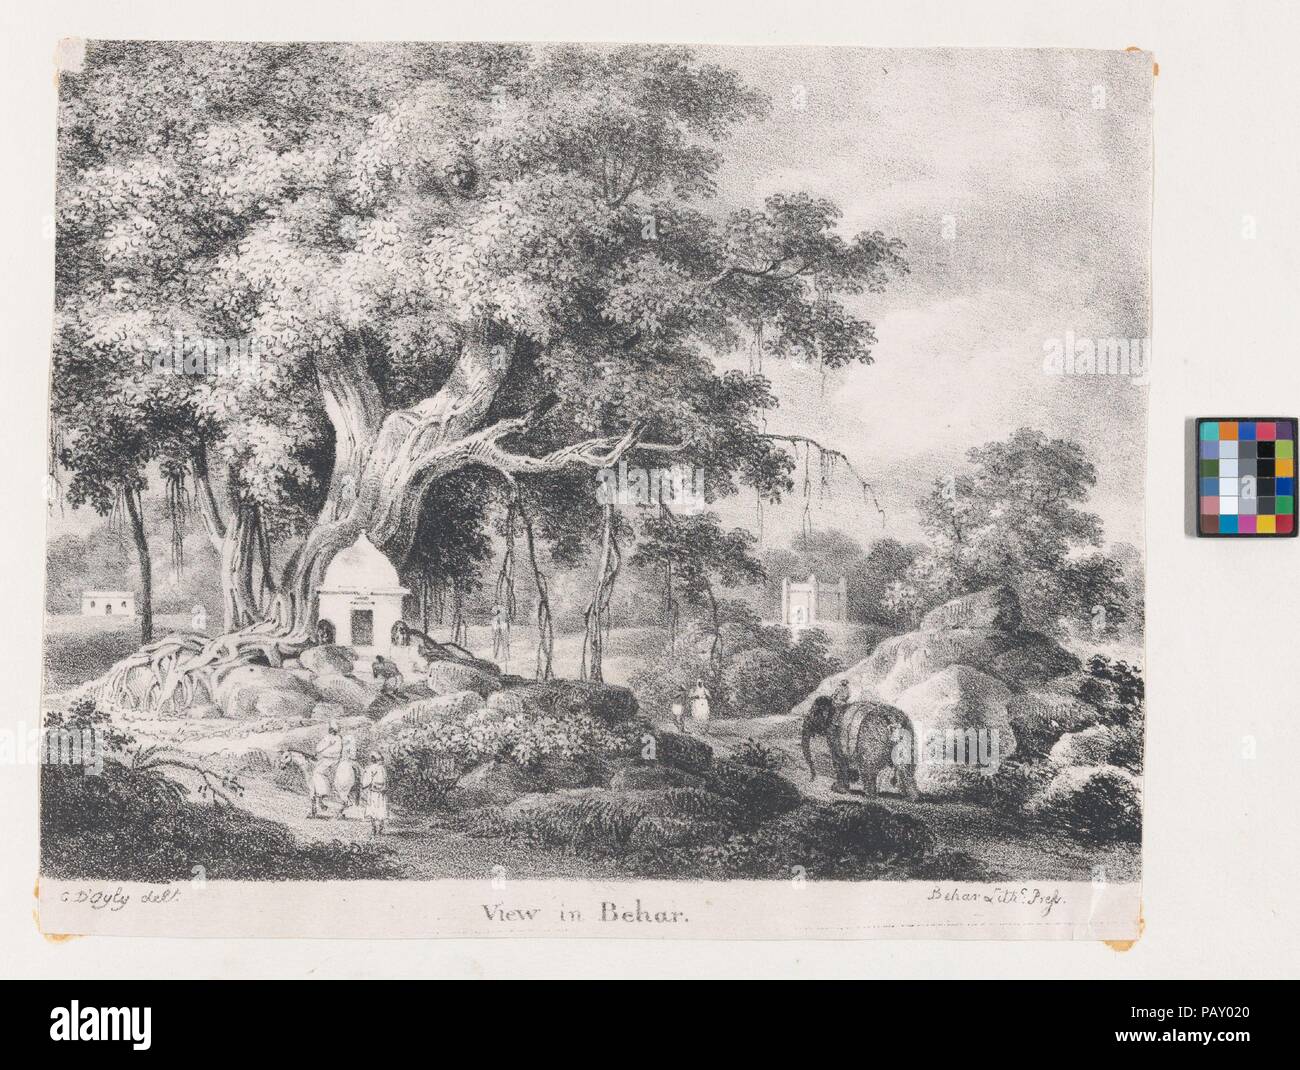 View in Behar, in an Anglo-Indian Album associated with Sir Charles D'Oyly. Artist: Sir Charles D'Oyly (British (born India), Murshidabad 1781-1845 Florence). Dimensions: Sheet: 5 15/16 x 7 3/8 in. (15.1 x 18.7 cm). Printer: Behar Lithographic Press (Bihar, India). Date: ca. 1828.  Born to English parents in Bengal, D'Oyly followed his father into the civil service. By 1820 he was the East India Company's opium agent and commercial resident, or tax collector, at Patna, on the Ganges River in Bihar, northeast India. An avid and accomplished amateur artist, whose 'pencil like his hookah-snake wa Stock Photo